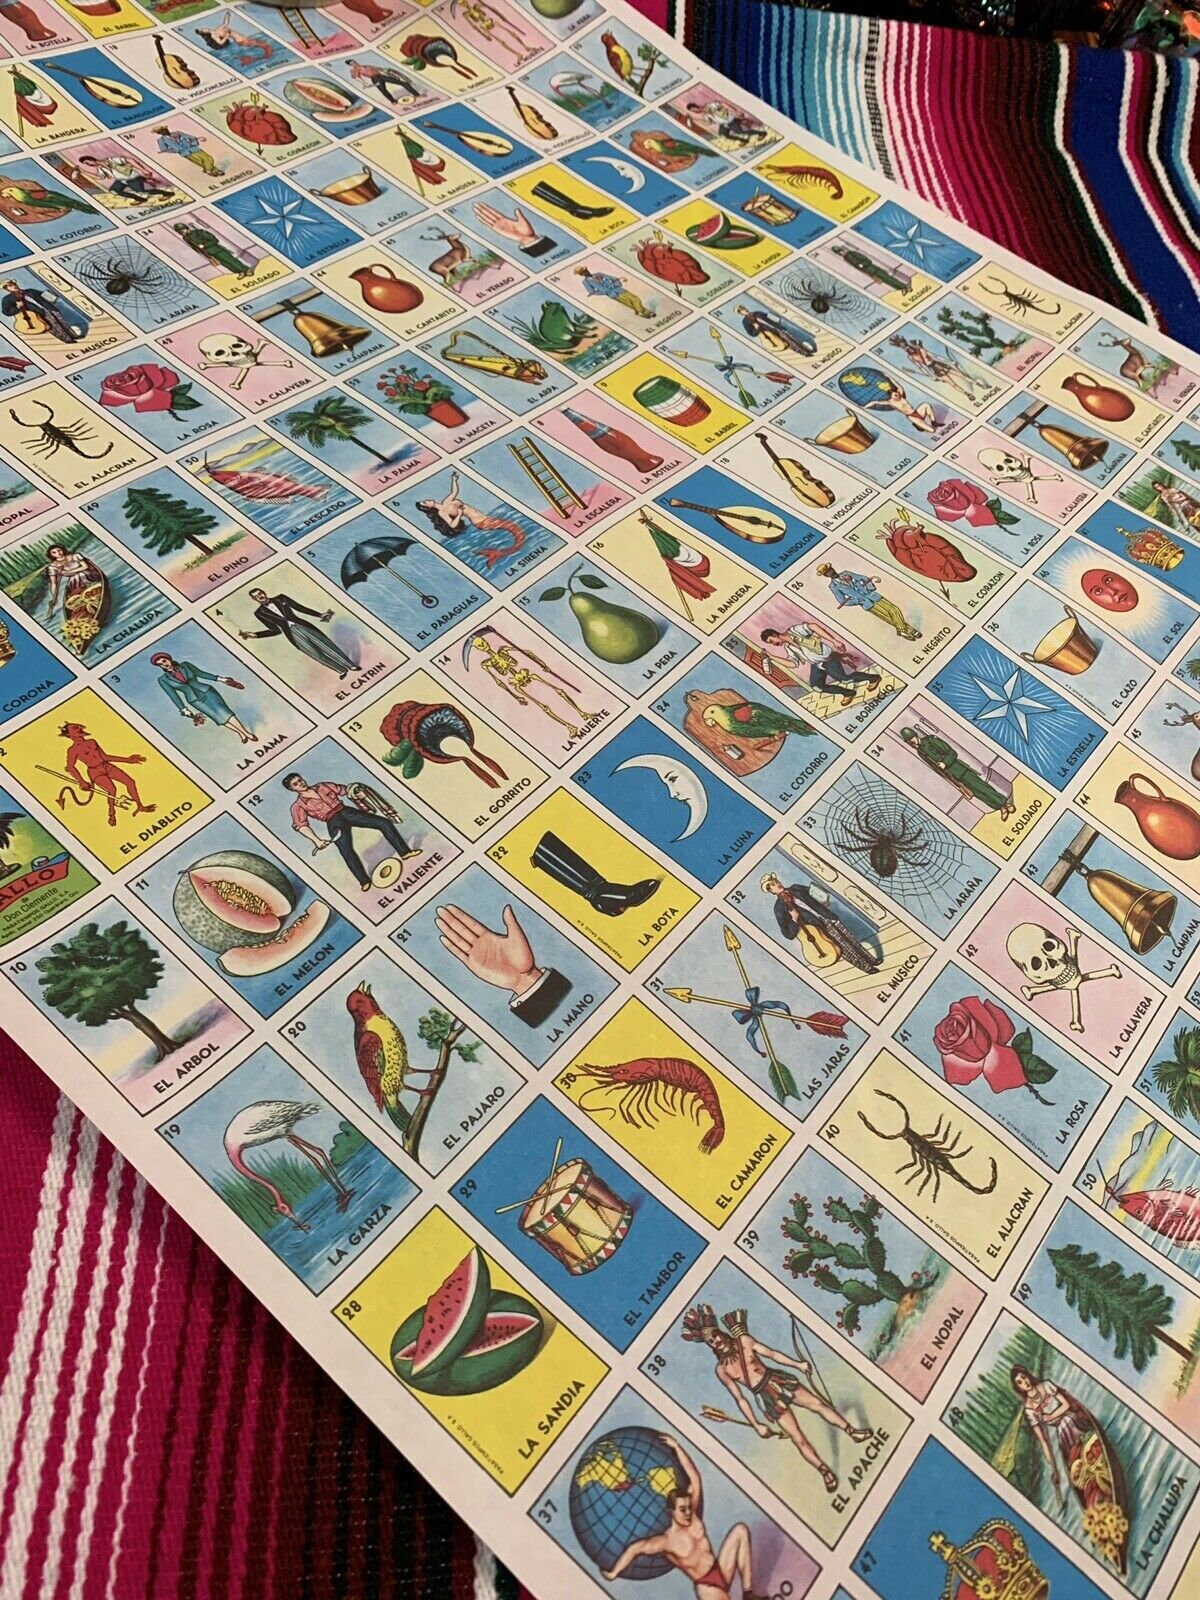 Unboxing and How To Play Loteria (Mexican Bingo) from Pasatiempos